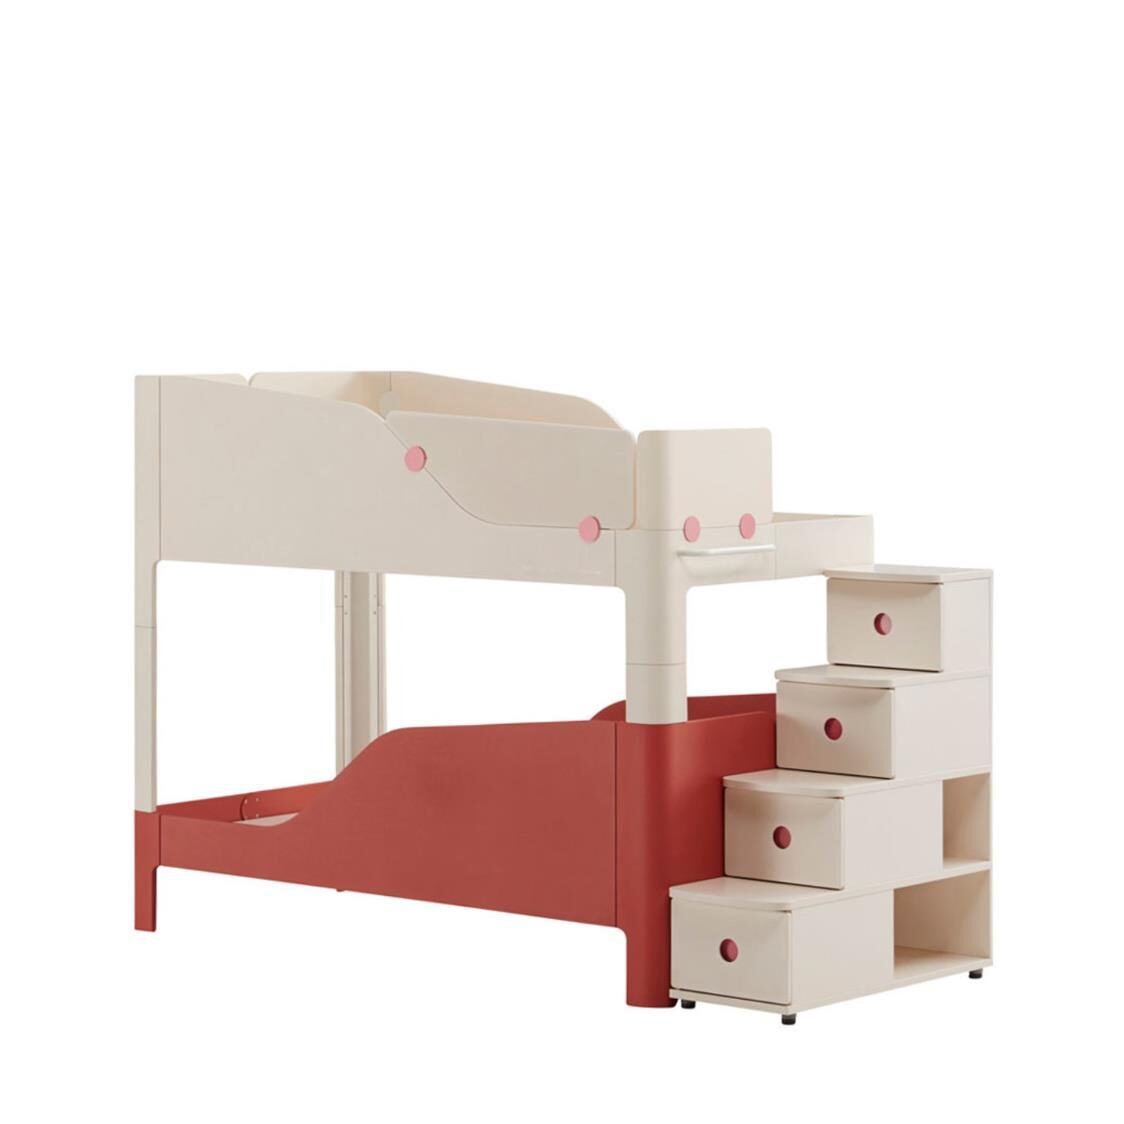 Iloom Tinkle Pop 2 Story Bed Stairs IVKR Ivory Red